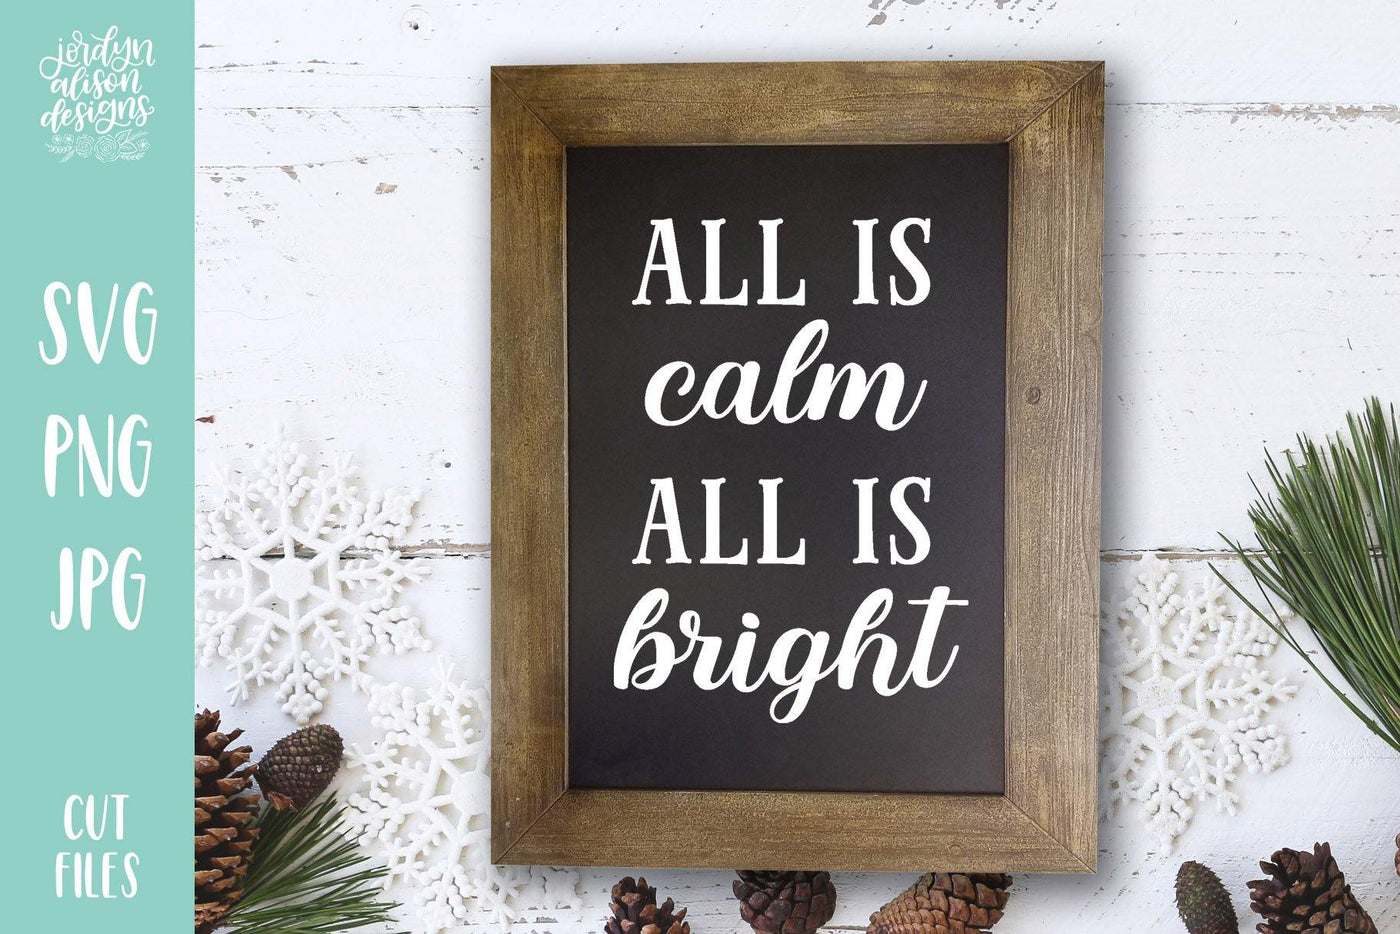 Rectangle frame with handwritten text in middle "All is calm, All is bright"